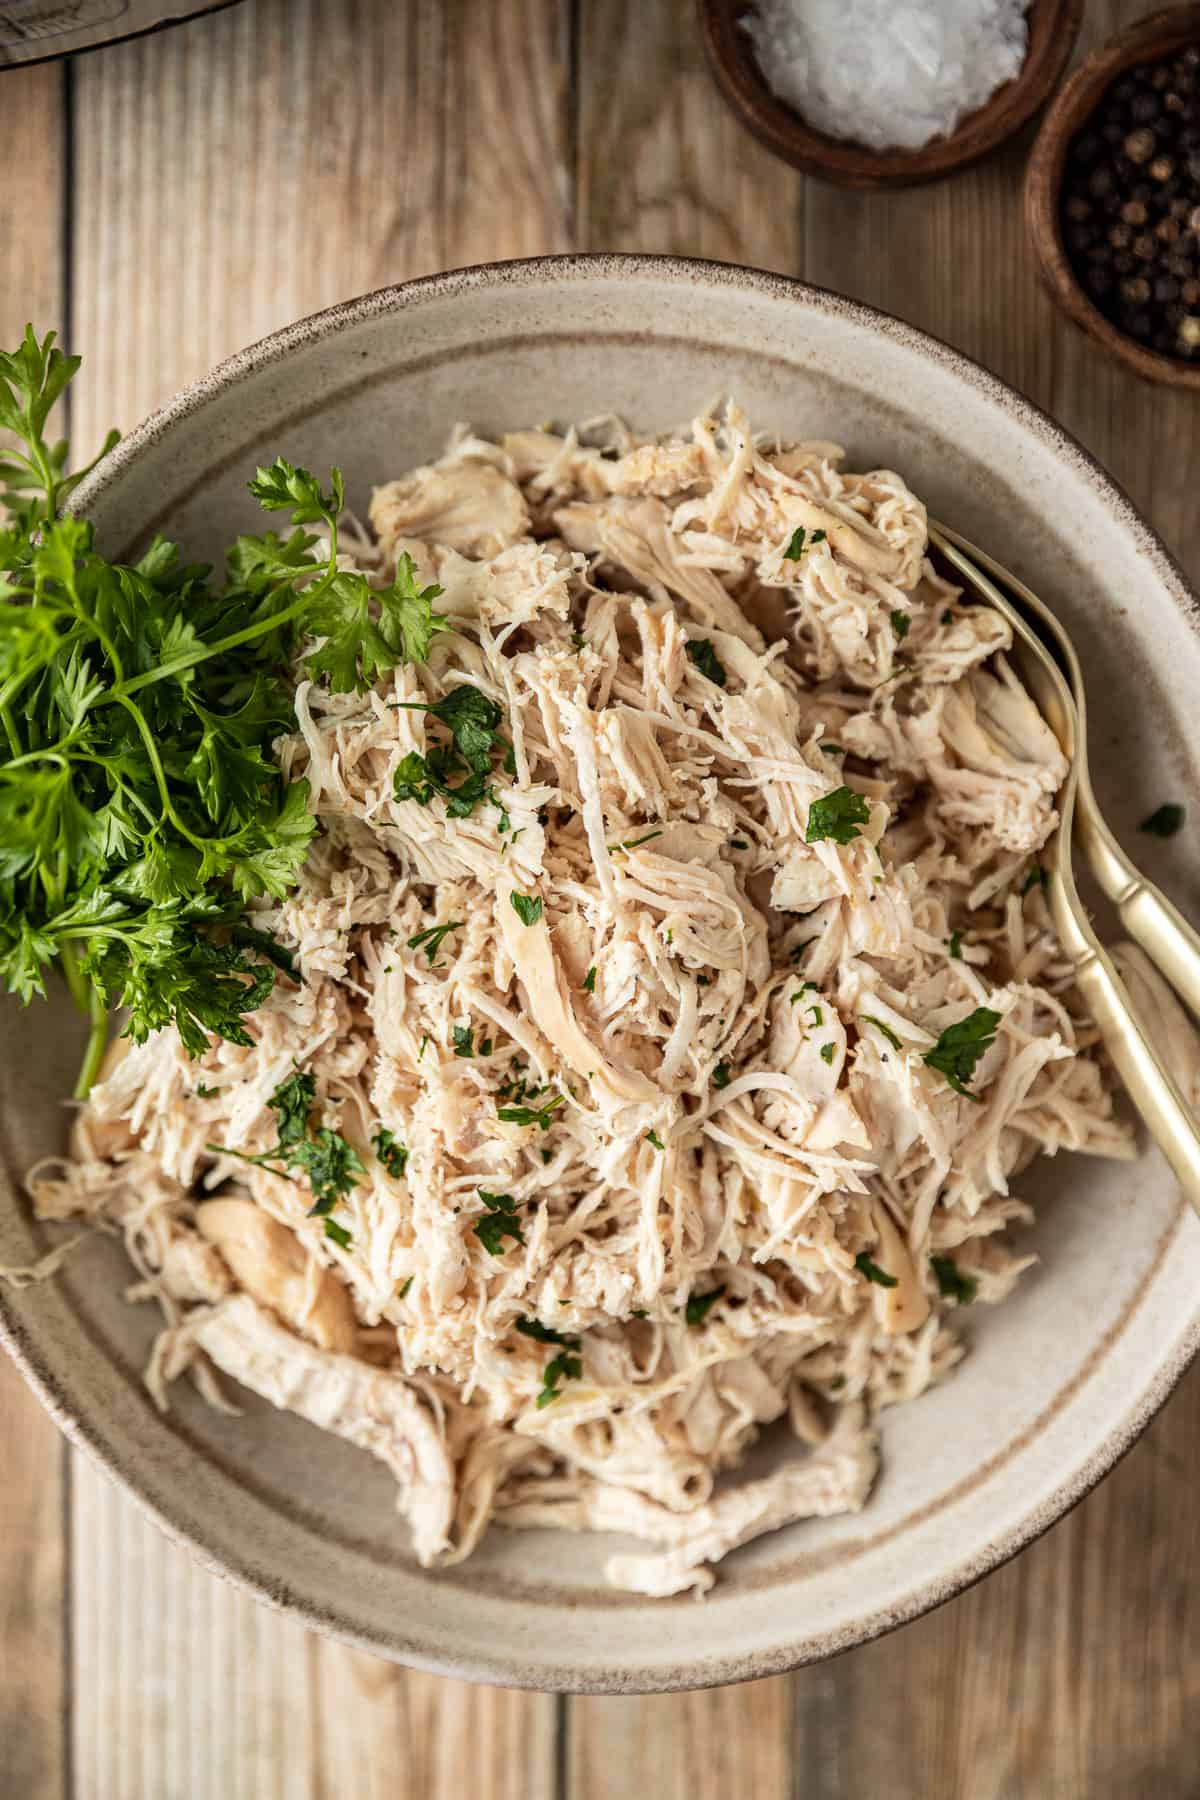 An overview shot of a bowl of plain shredded chicken topped with chopped parsley in a beige bowl.